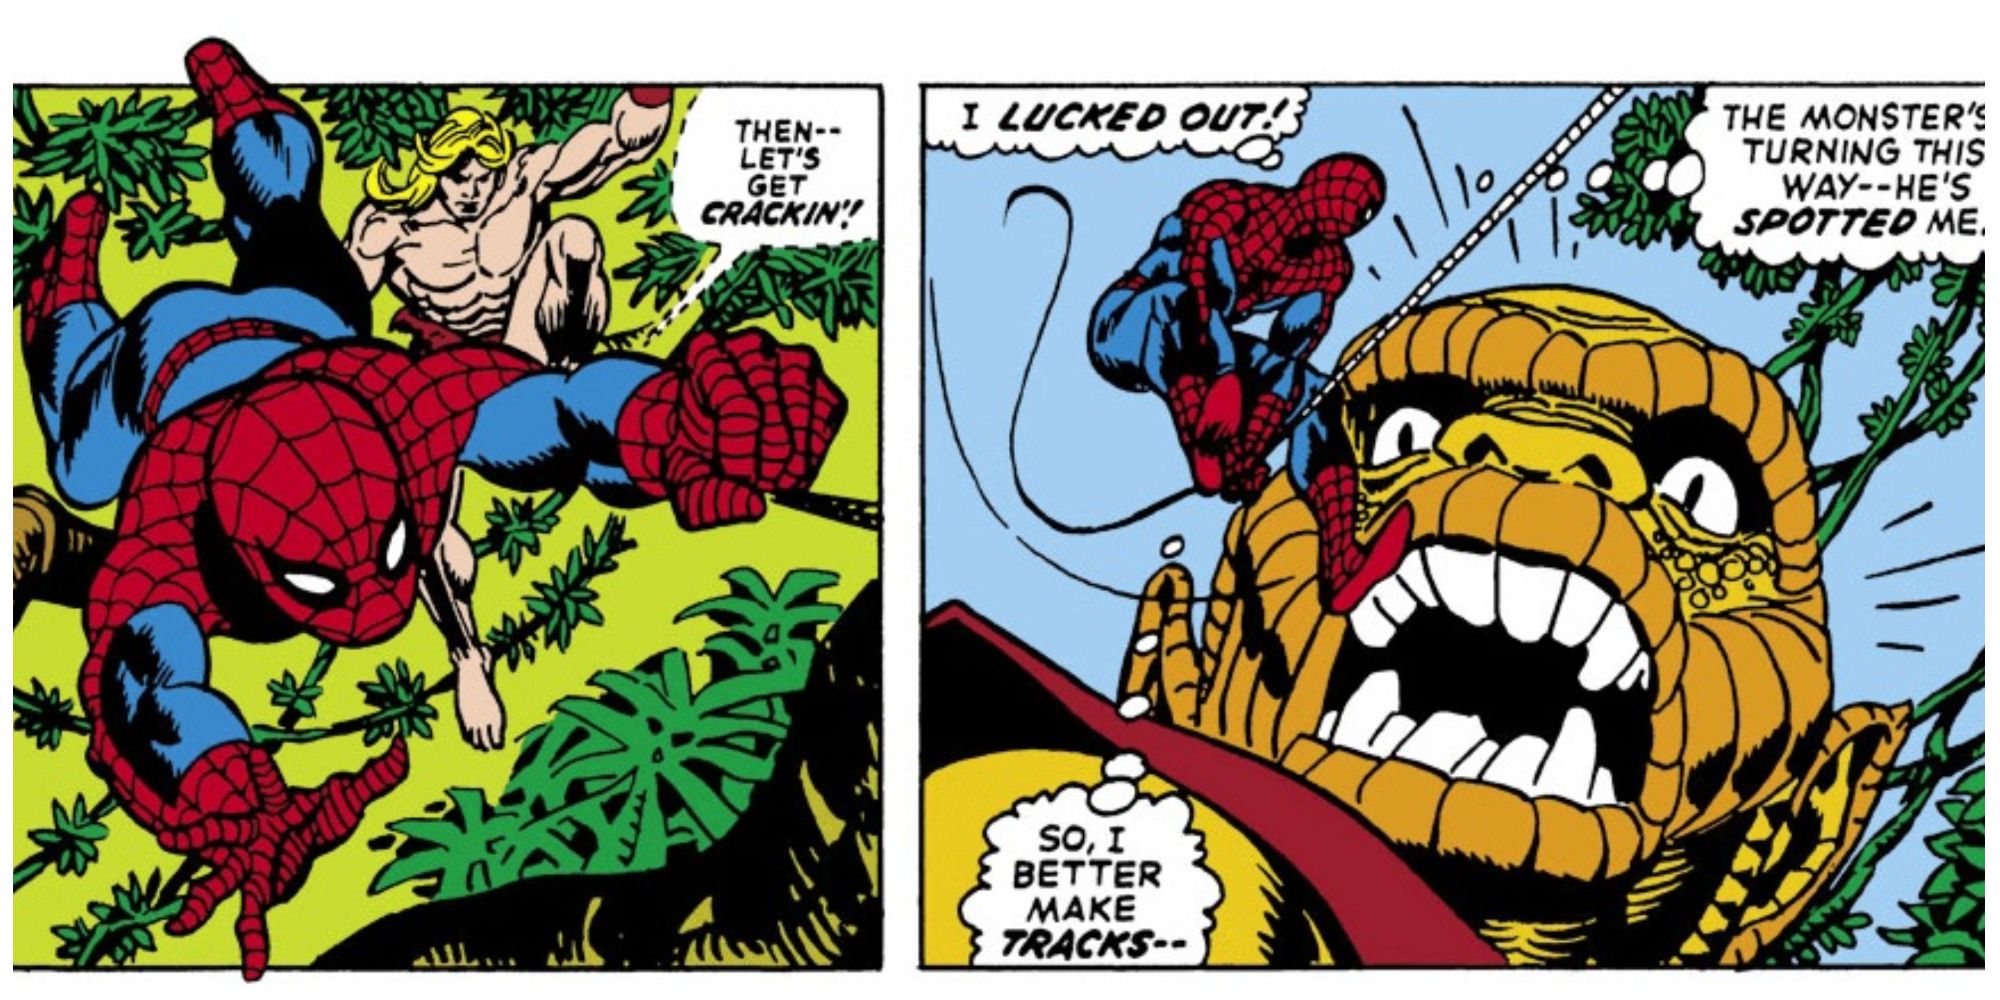 Spider-Man fighting a monster in the comic books